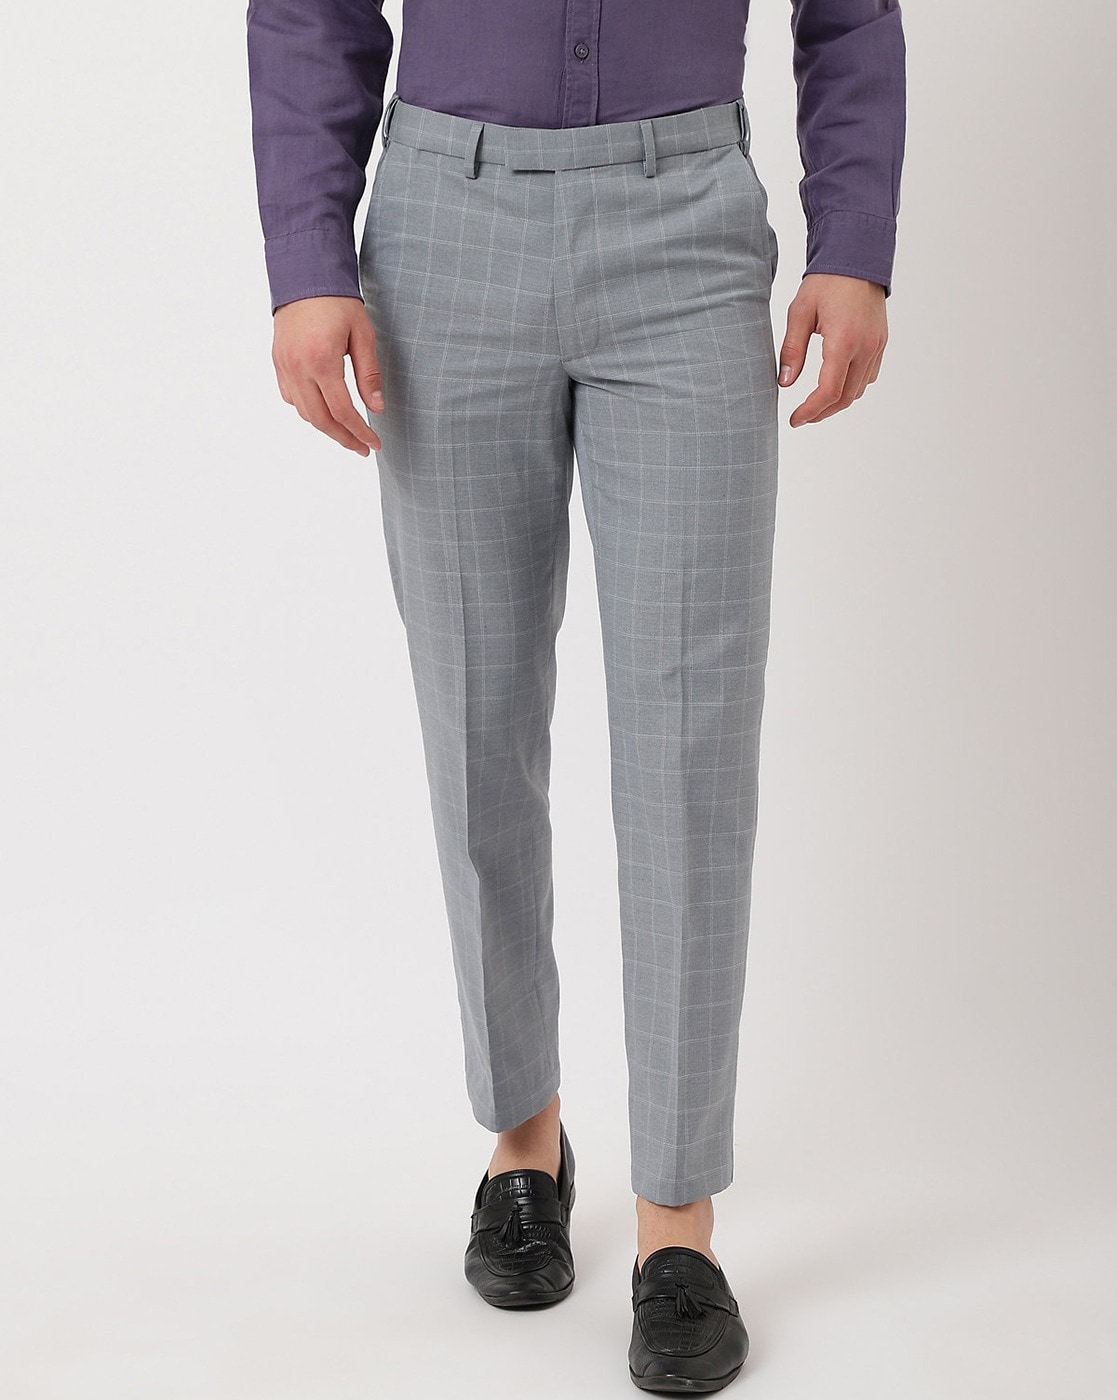 Stylish Men's Checked Trousers Formal Smart Casual Office Trousers Business  Dress Pants Skinny Trousers | Walmart Canada